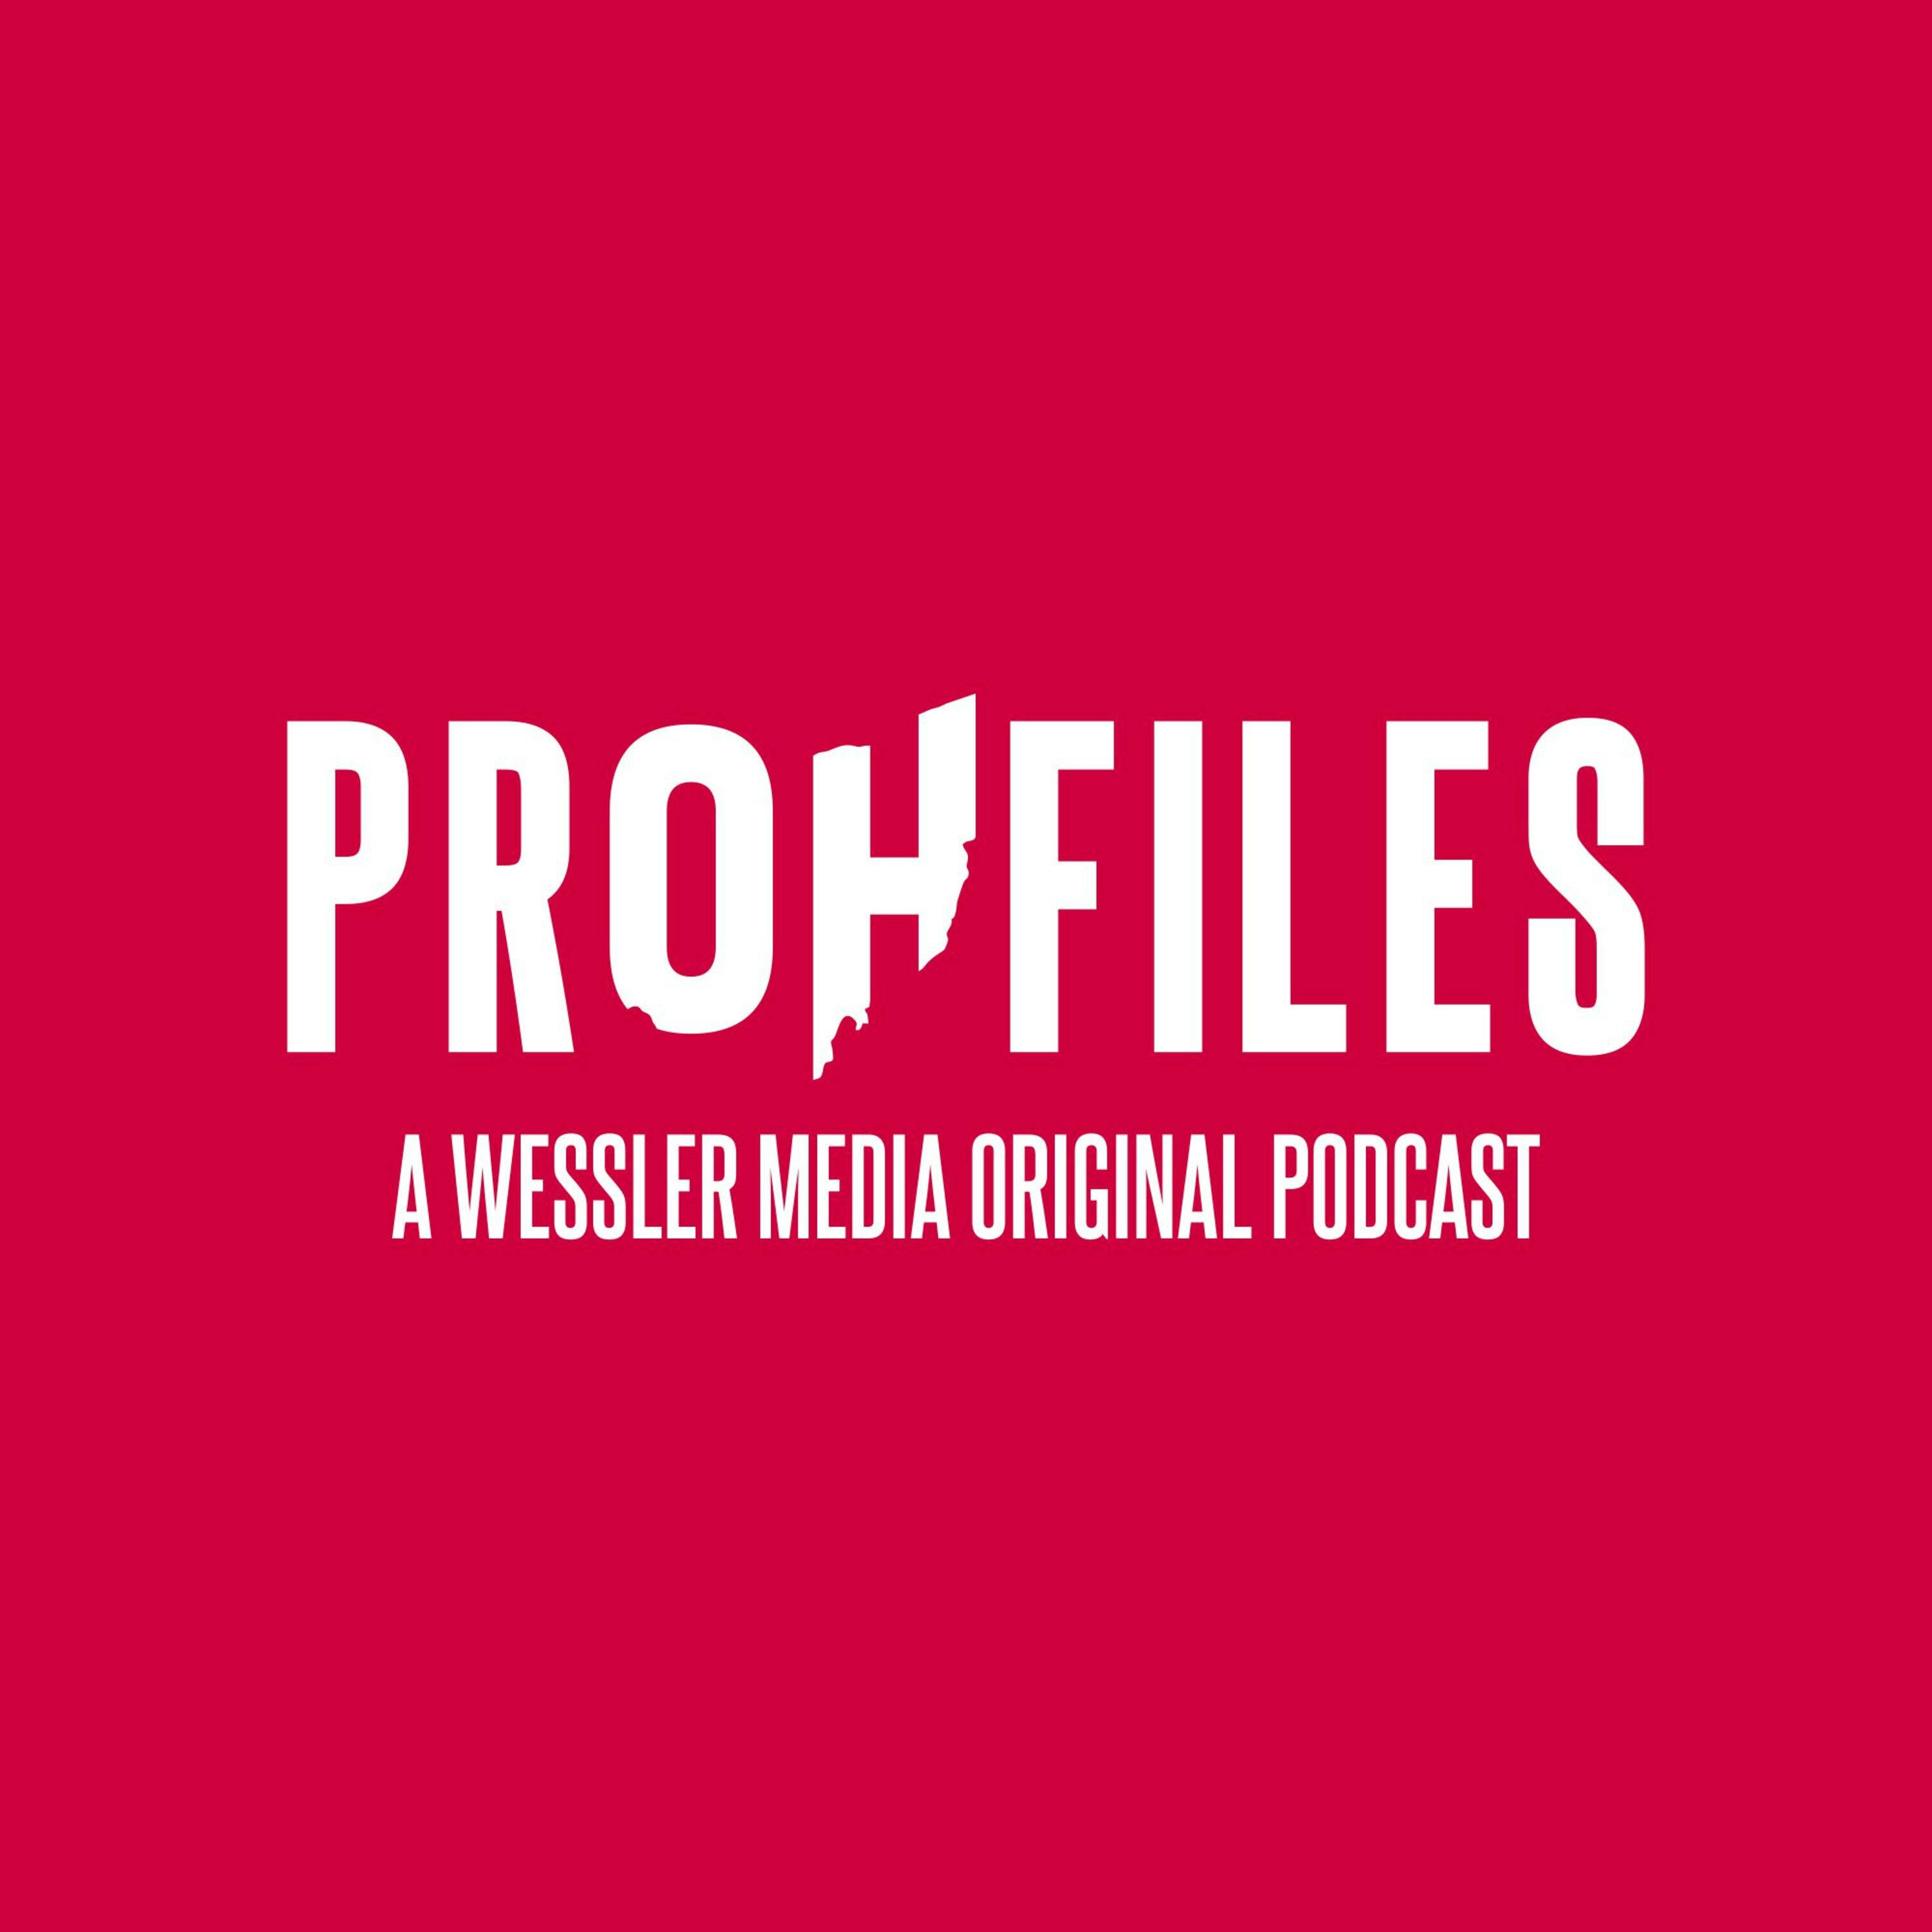 SEASON 1 TRAILER | THIS IS "PROHFILES"